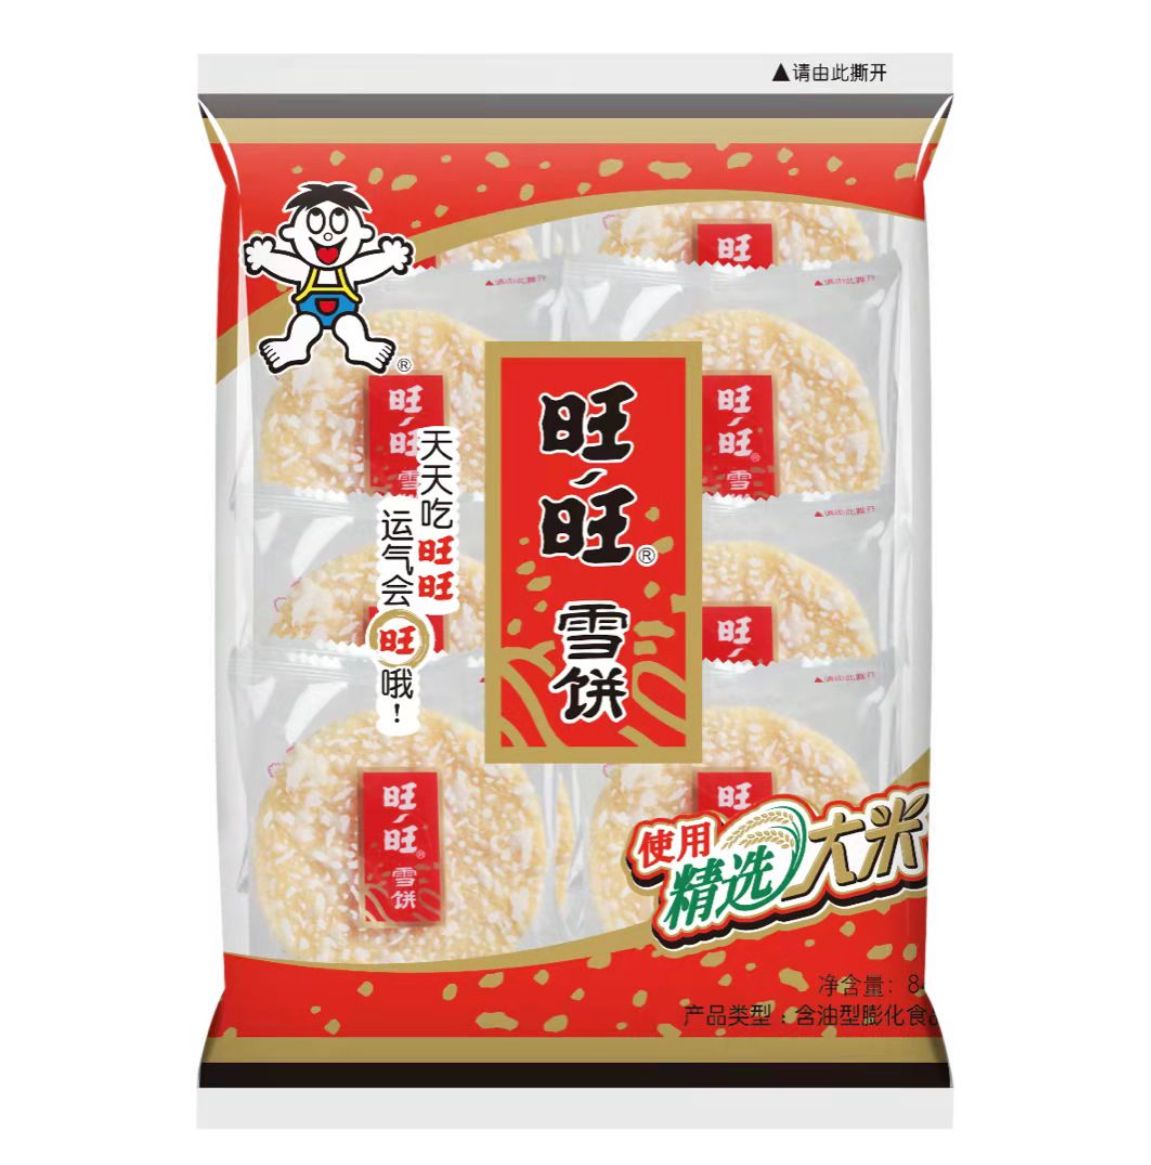 WangWang snow biscuits sweet biscuits rice biscuits Snow Rice Cracker Crispy 8pcs/pack